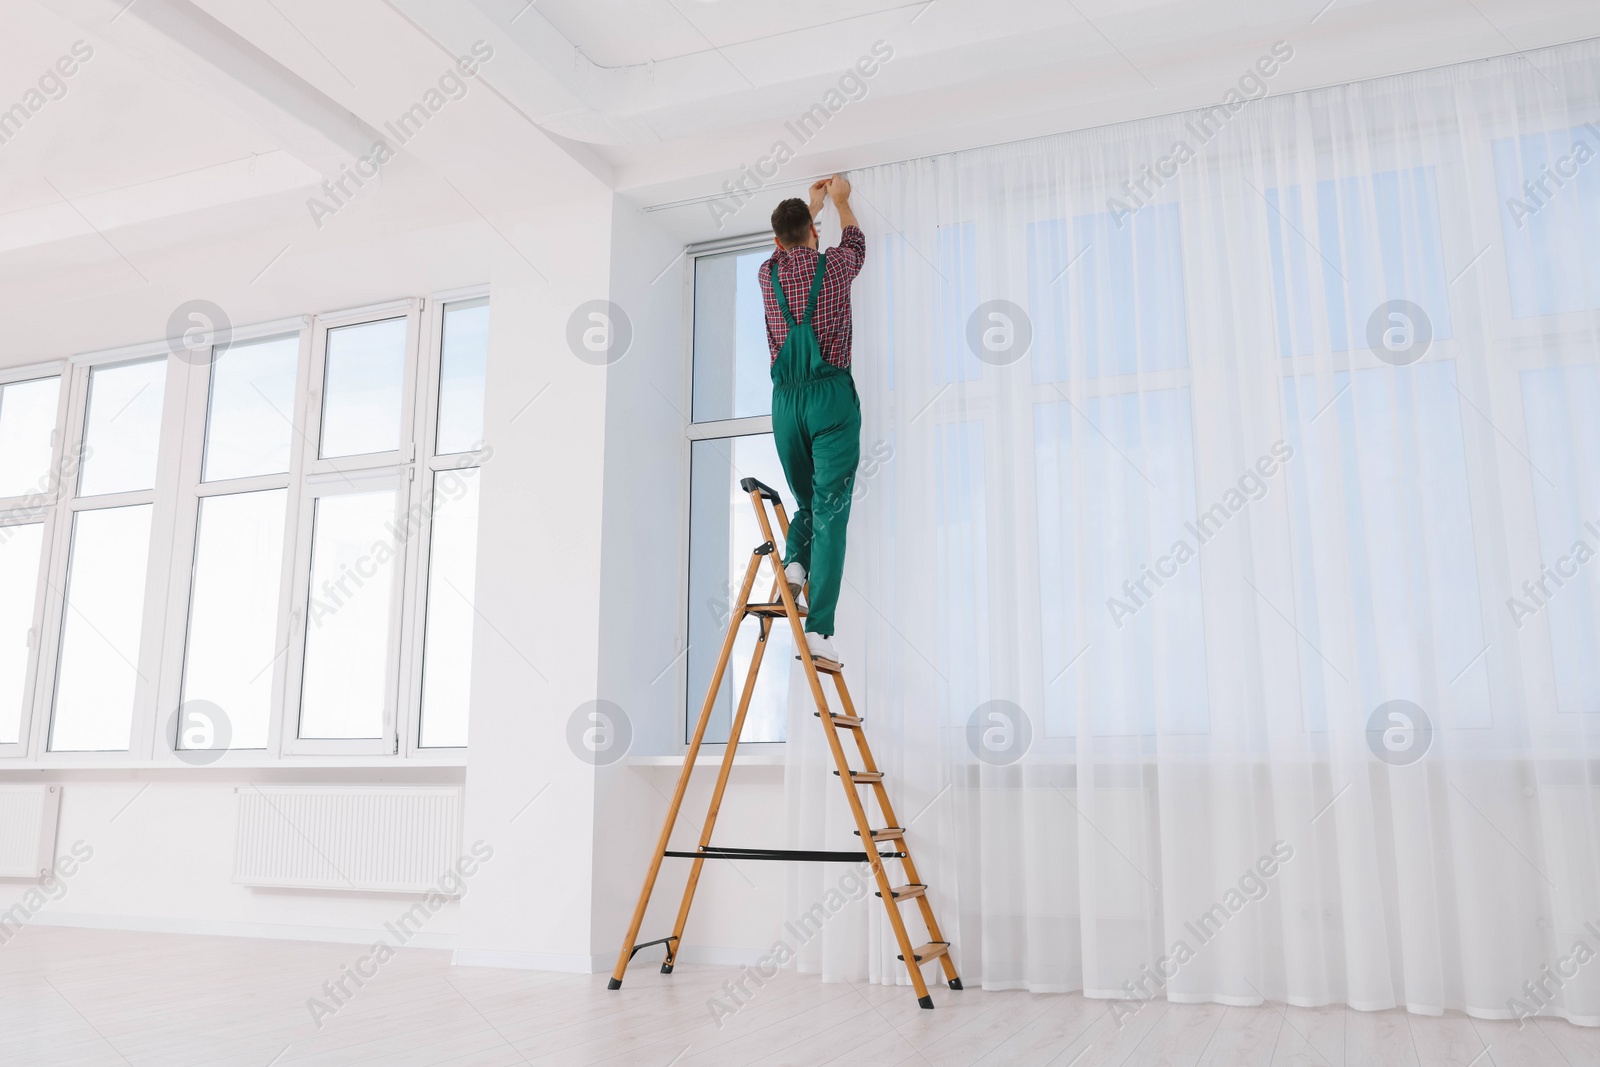 Photo of Worker in uniform hanging window curtain indoors, back view